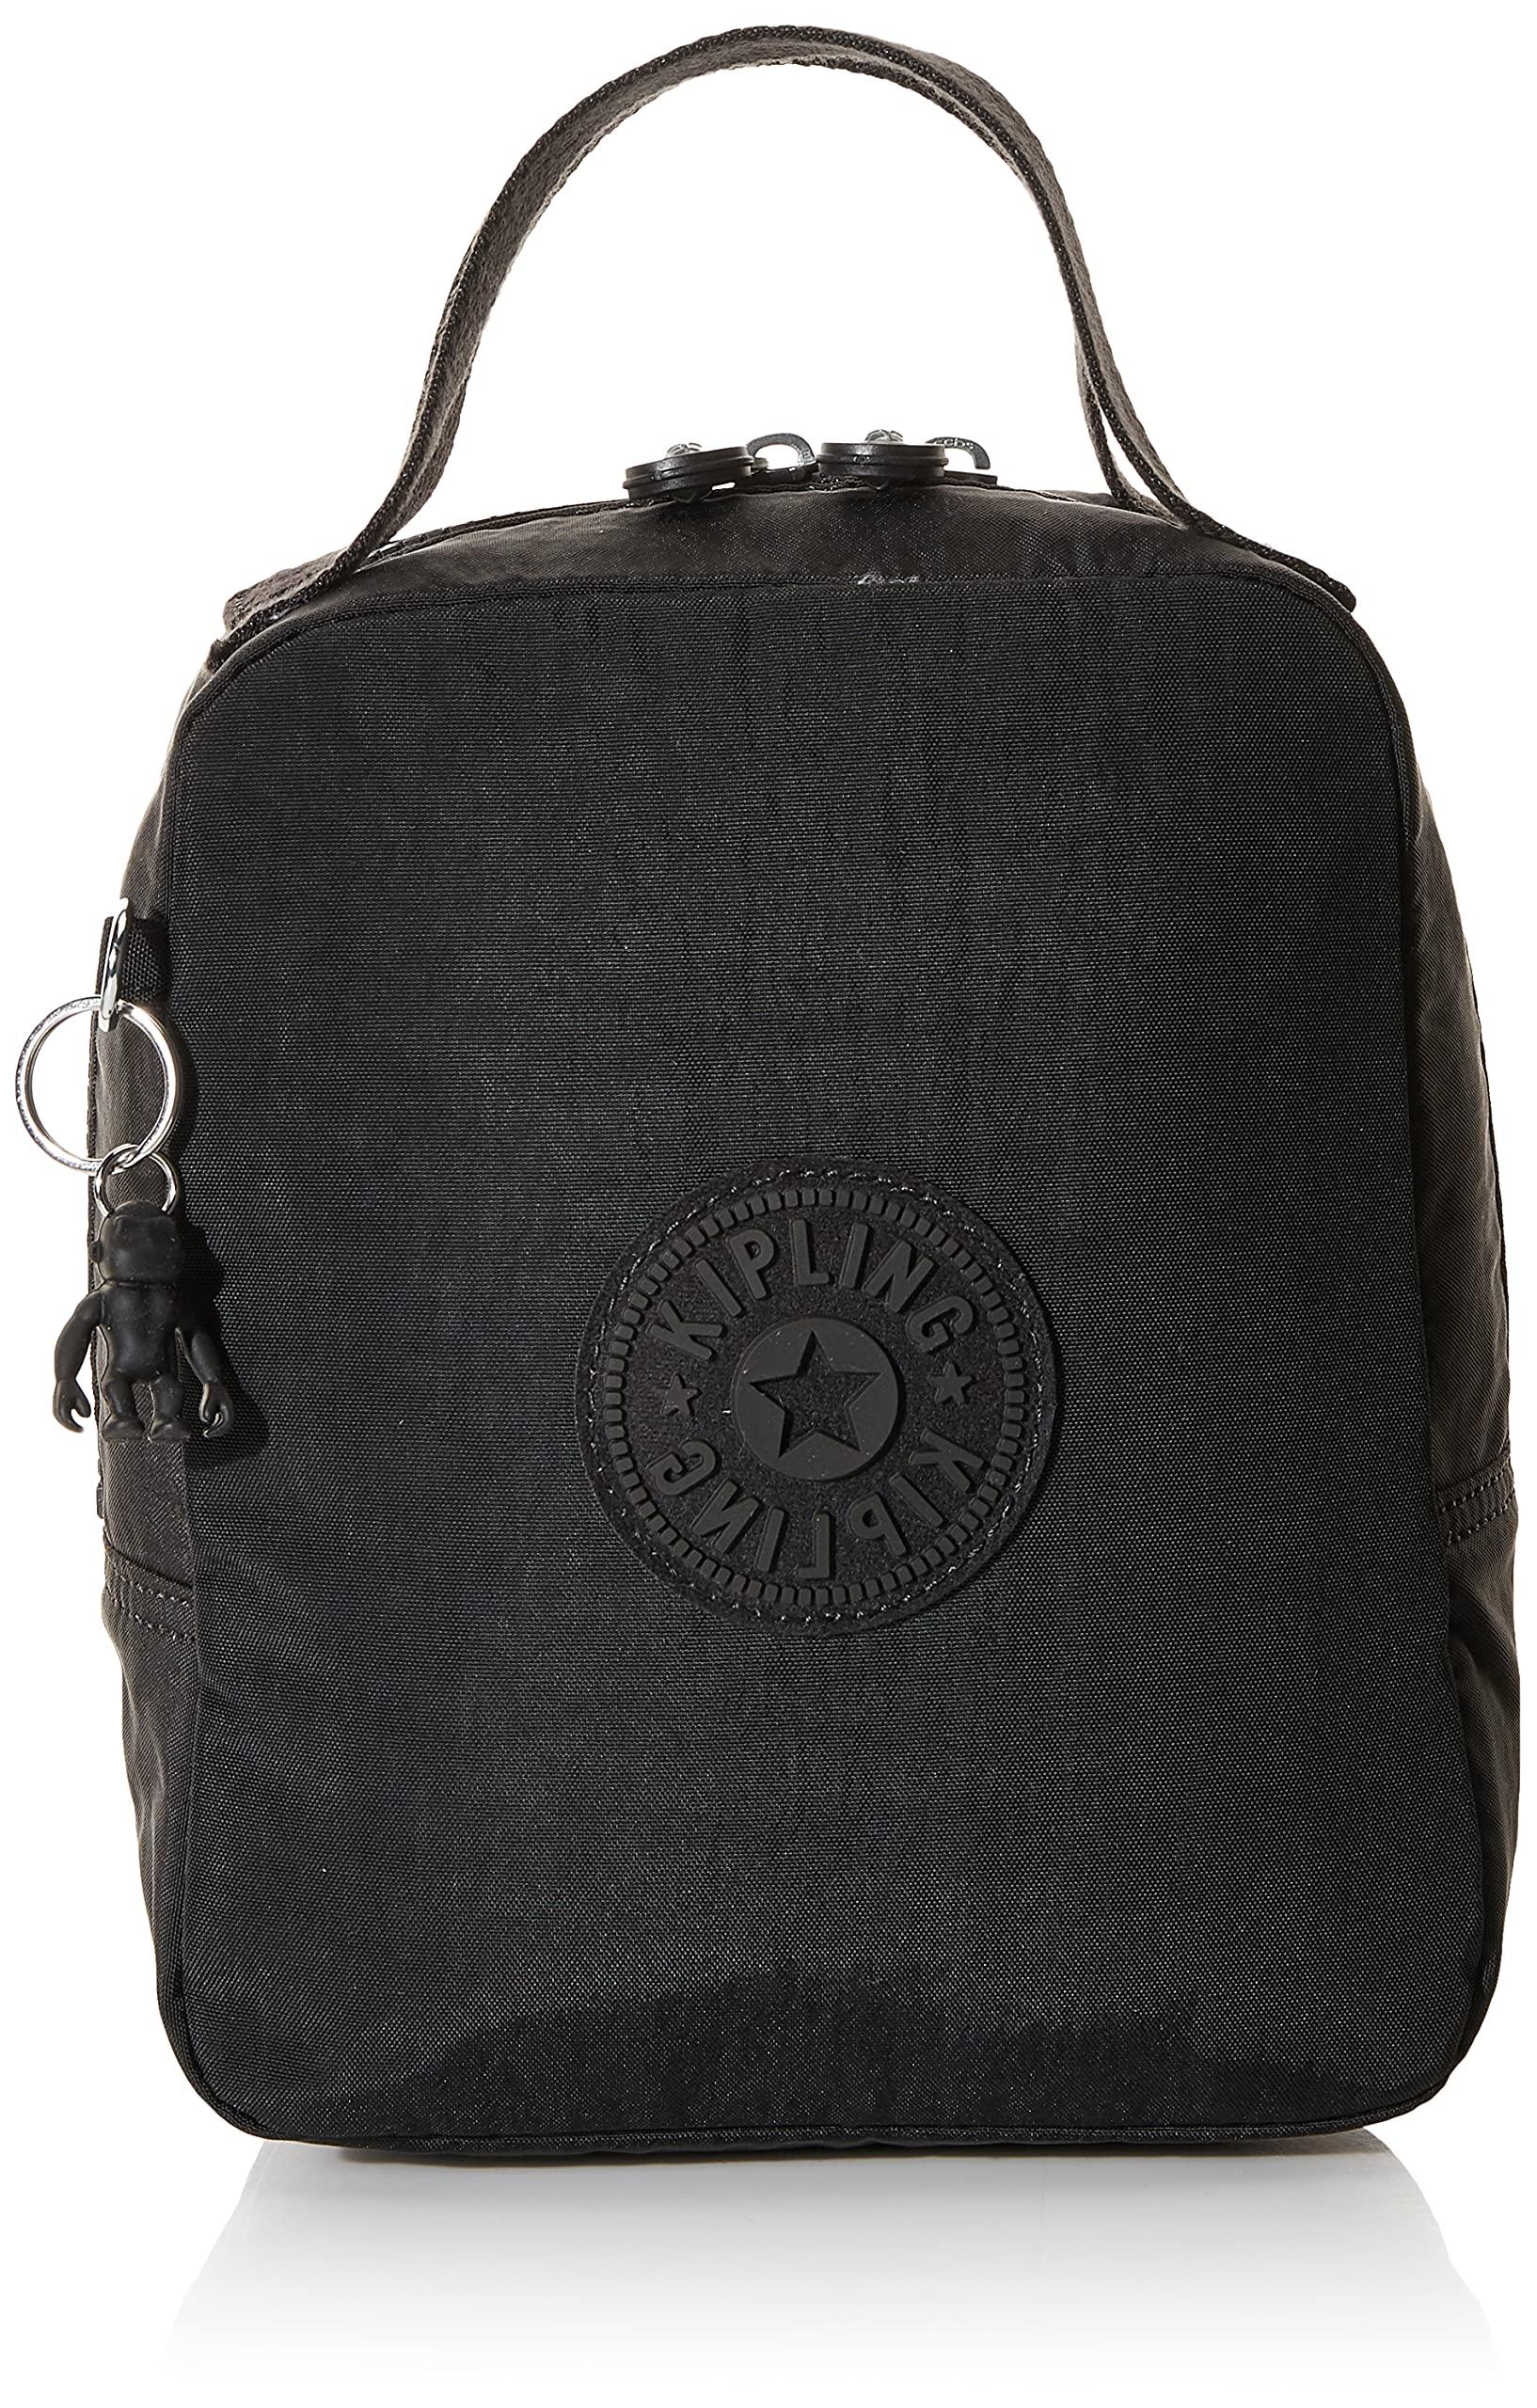 Kipling Lyla Insulated Lunch Bag Top Handle in Black | Lyst